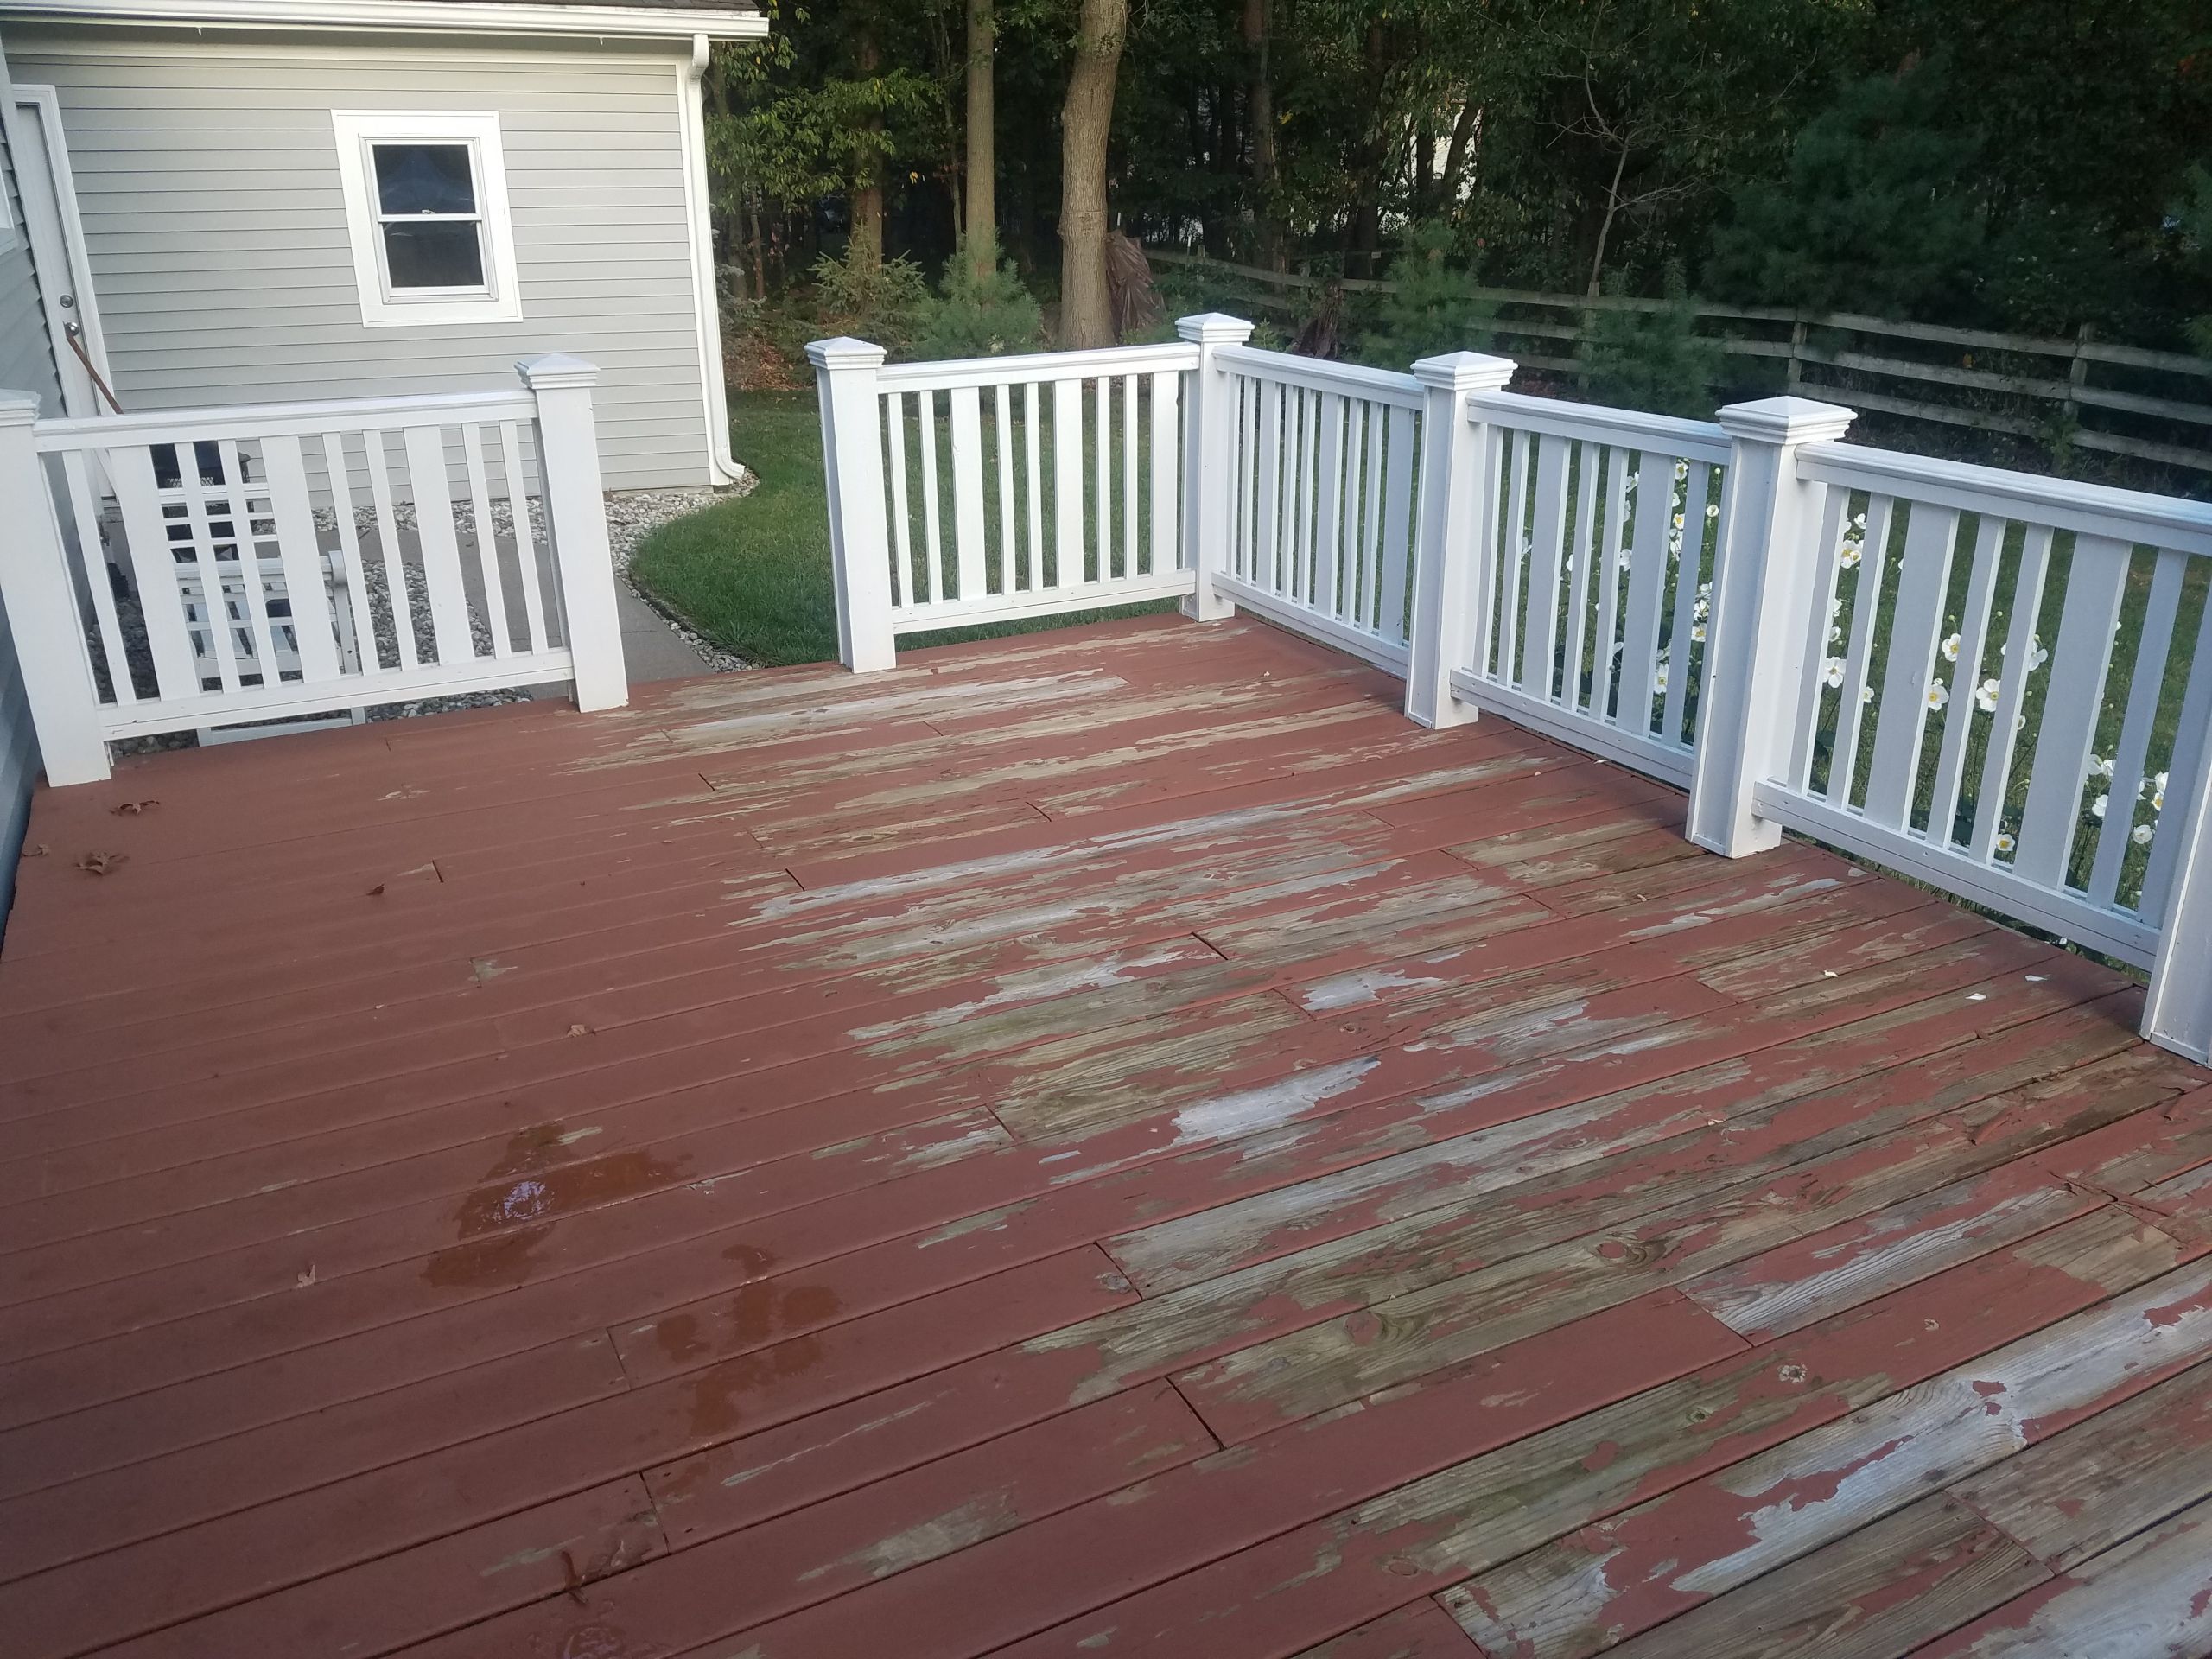 Olympic Deck Paint
 Behr Deckover Olympic Rescue It Rust Oleum Deck Restore